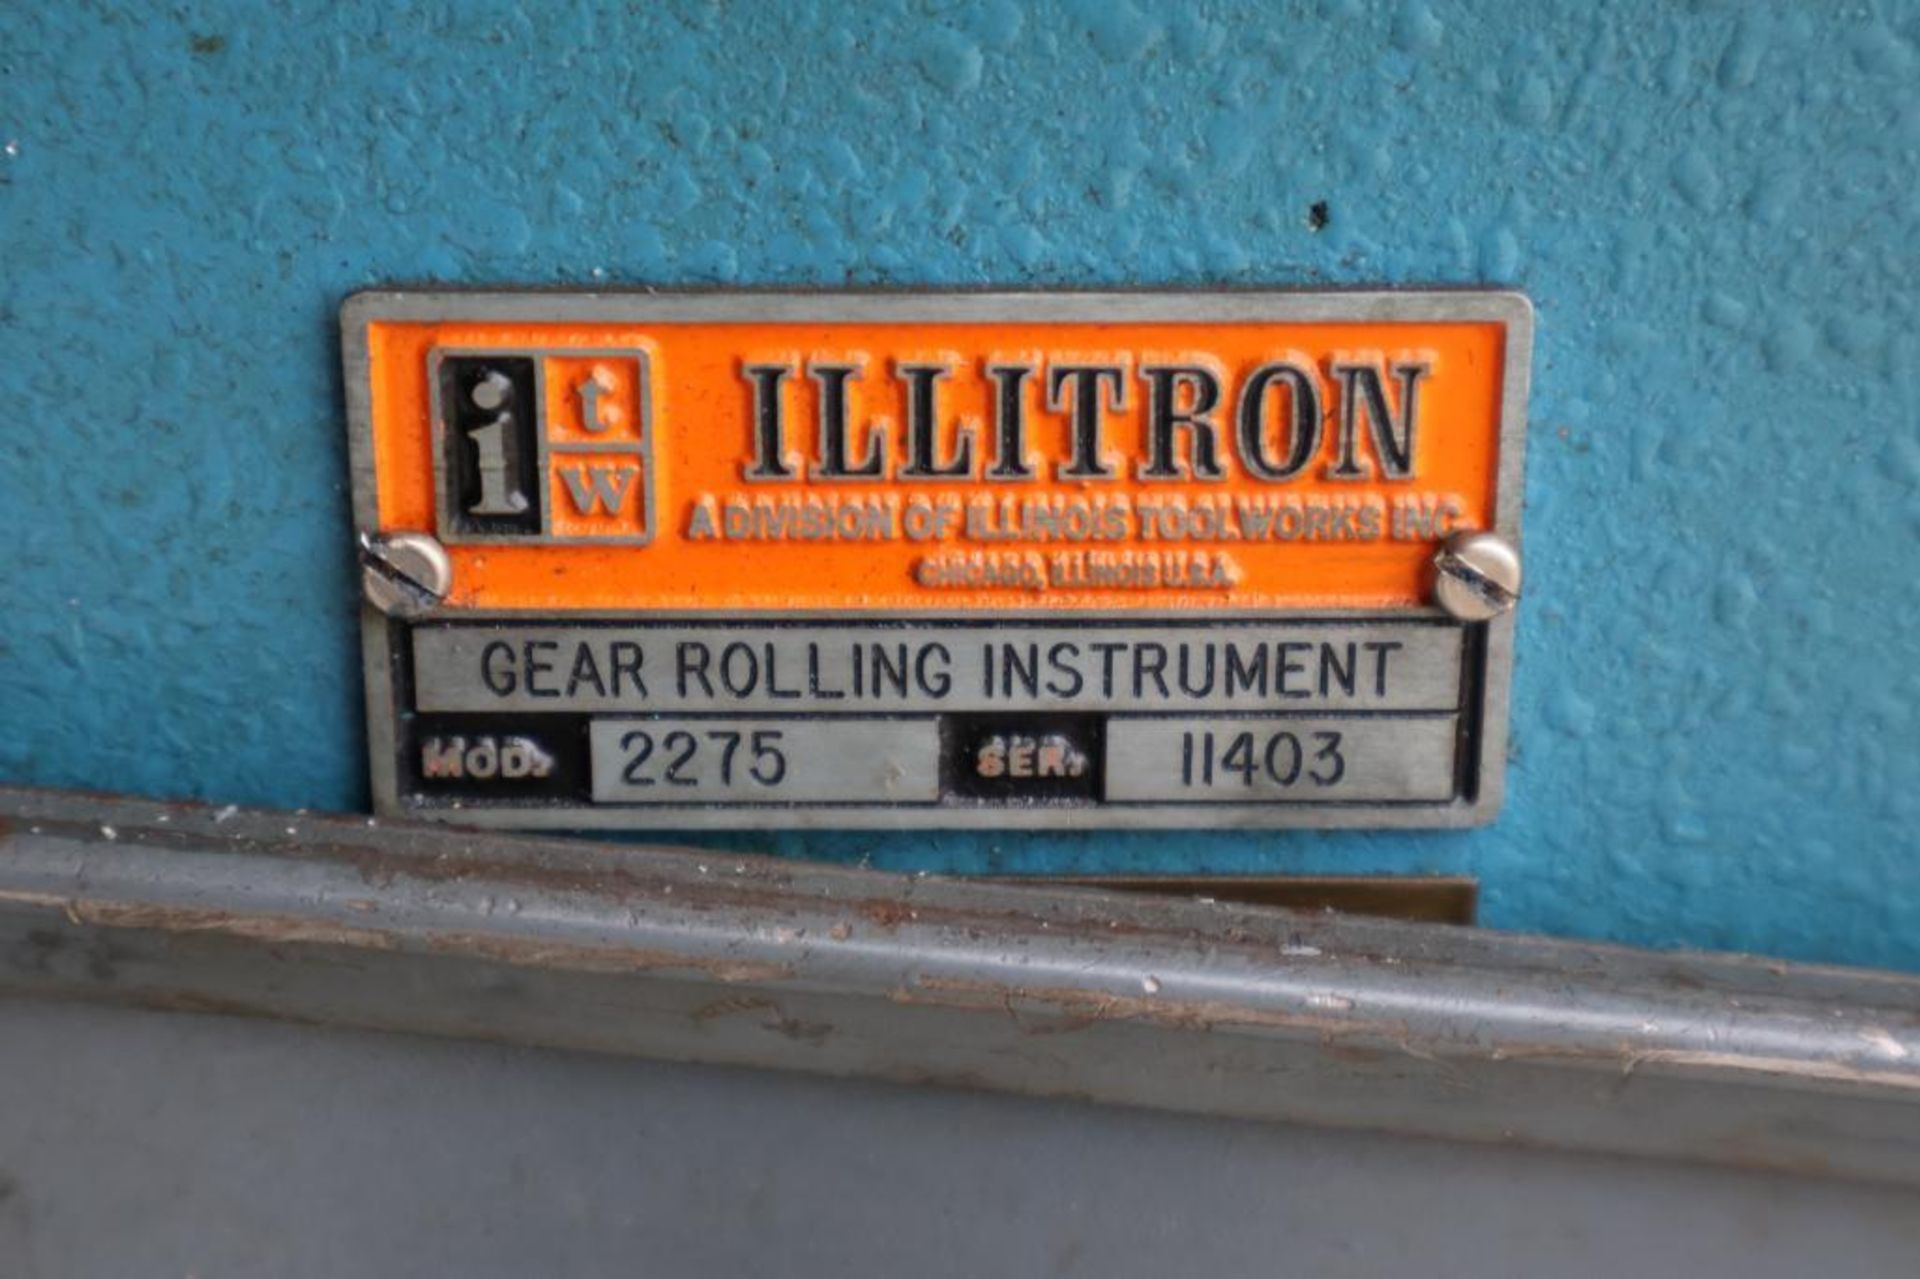 Illitron 2275 gear rolling instrument w/cart - Image 9 of 12